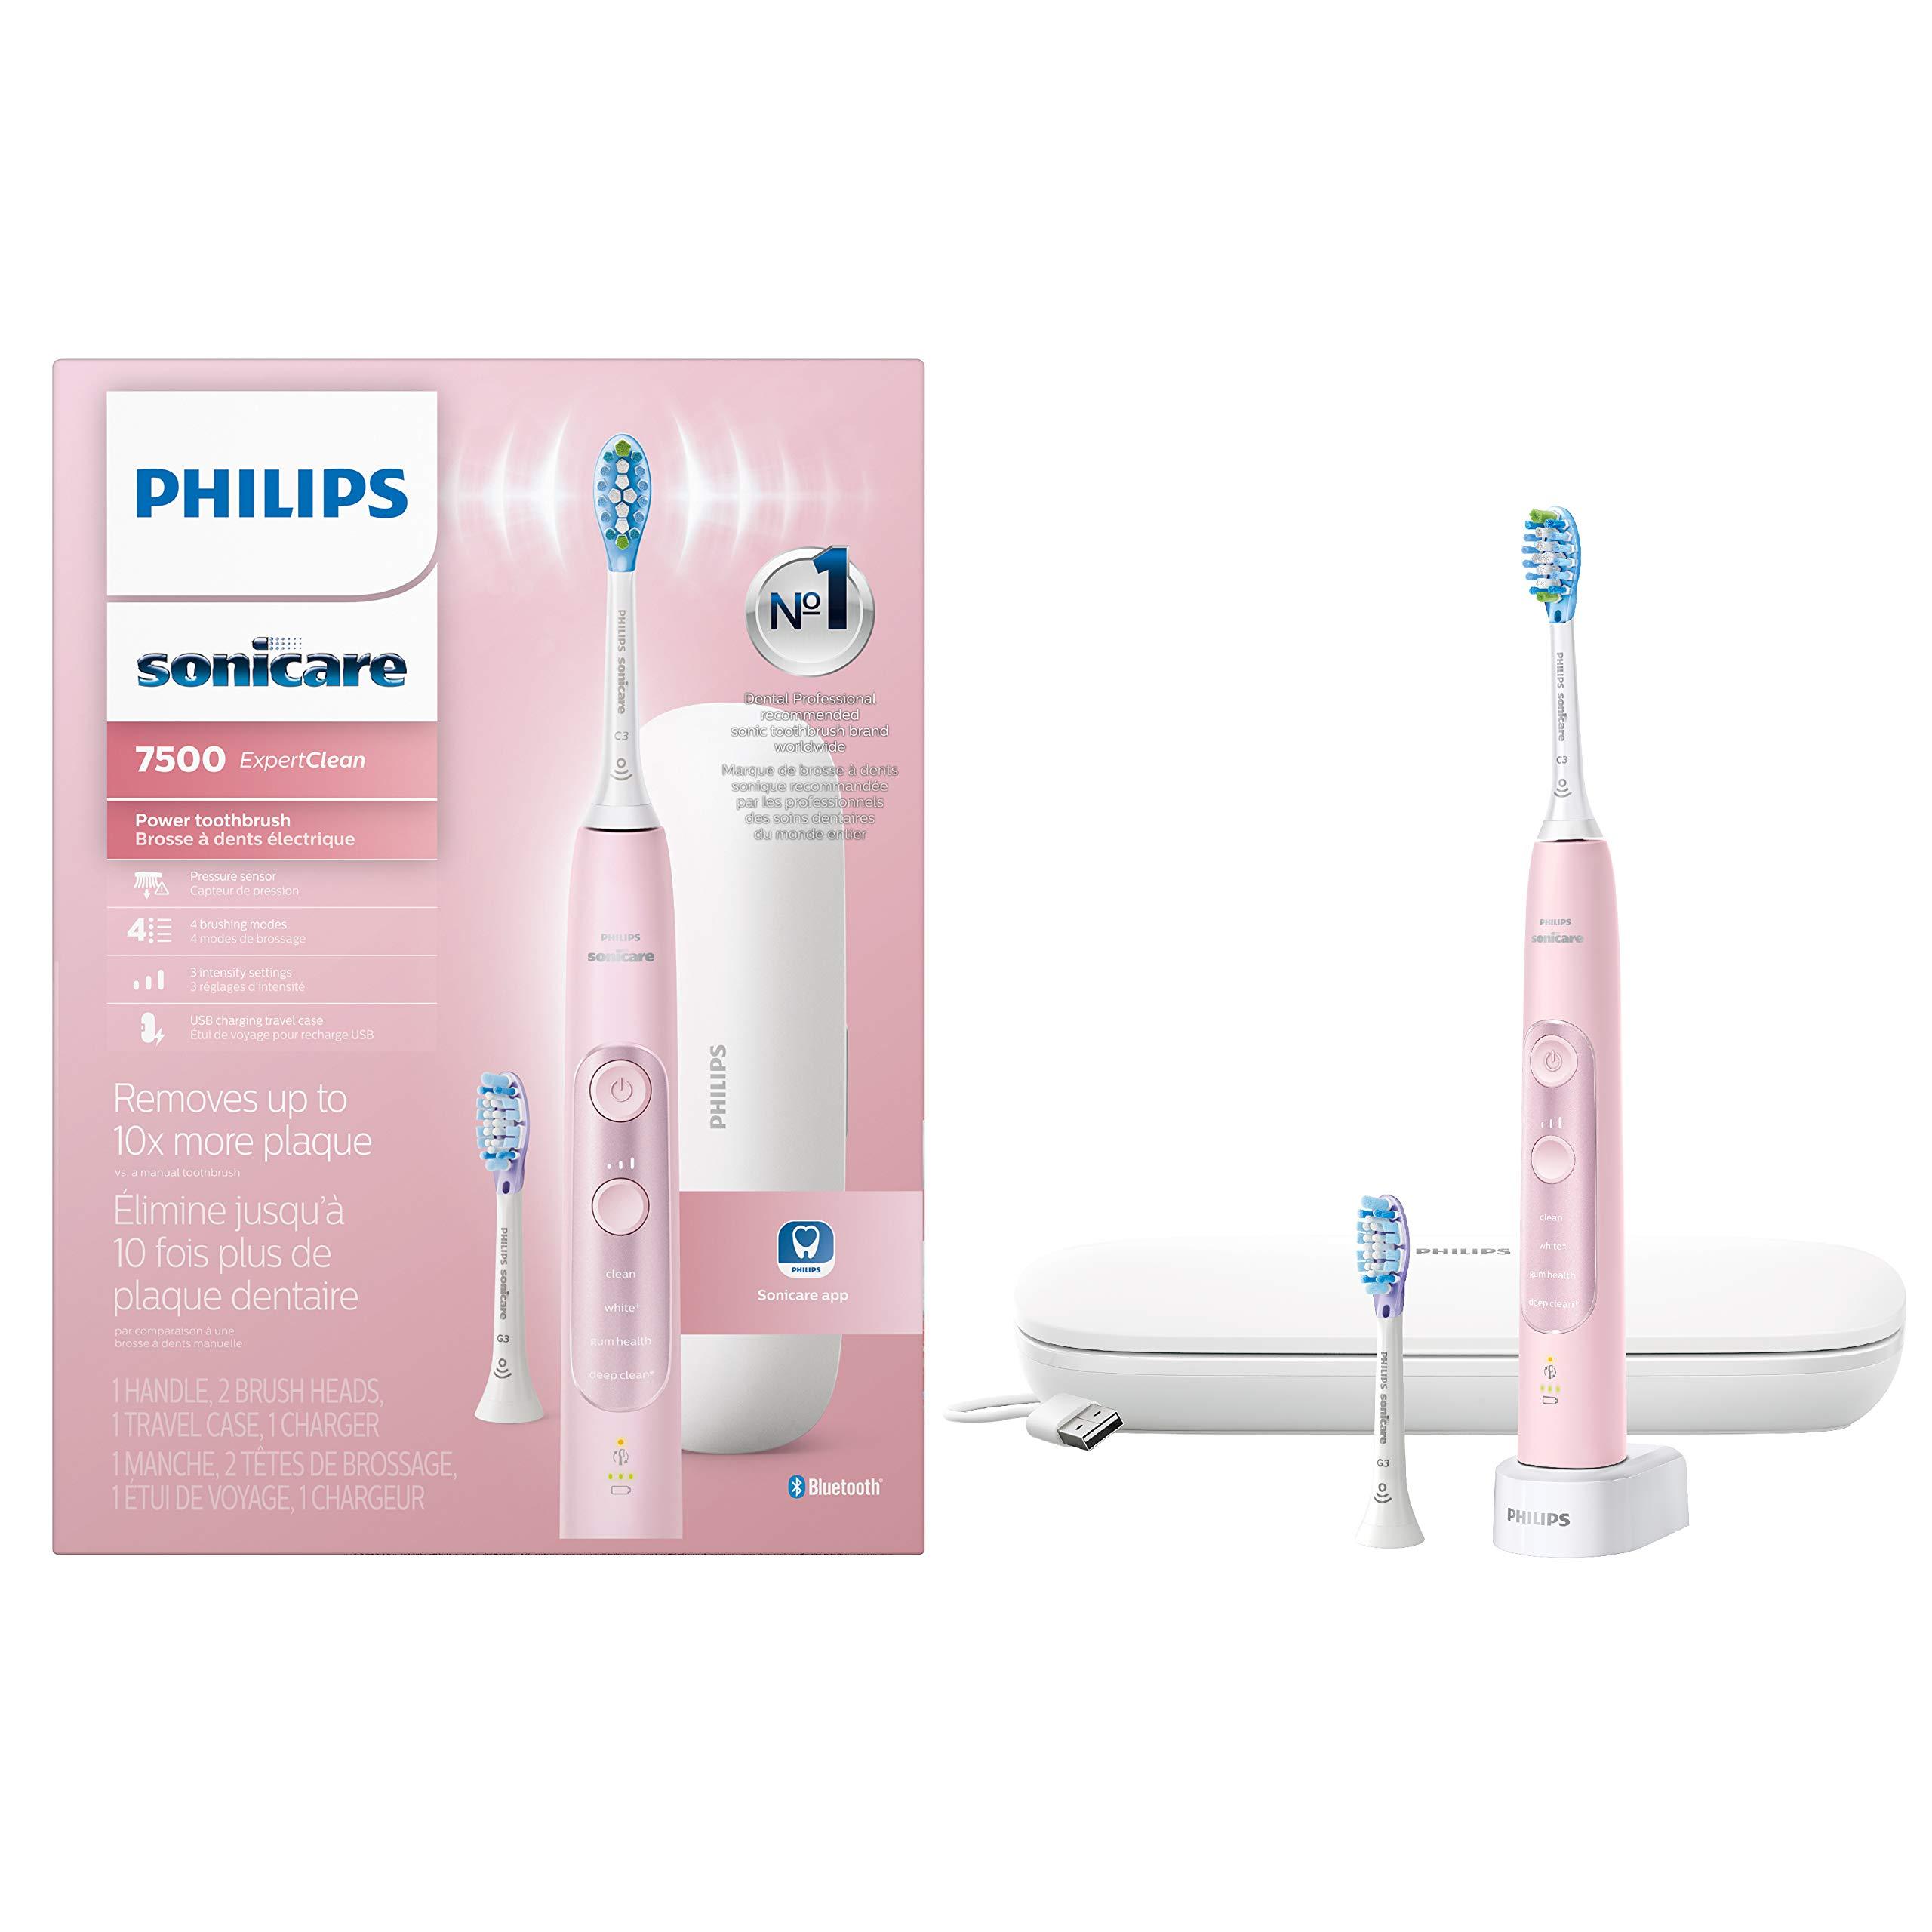 Philips Sonicare ExpertClean 7500 Rechargeable Electric Toothbrush for Adults, Pink HX9690/07 - image 1 of 16